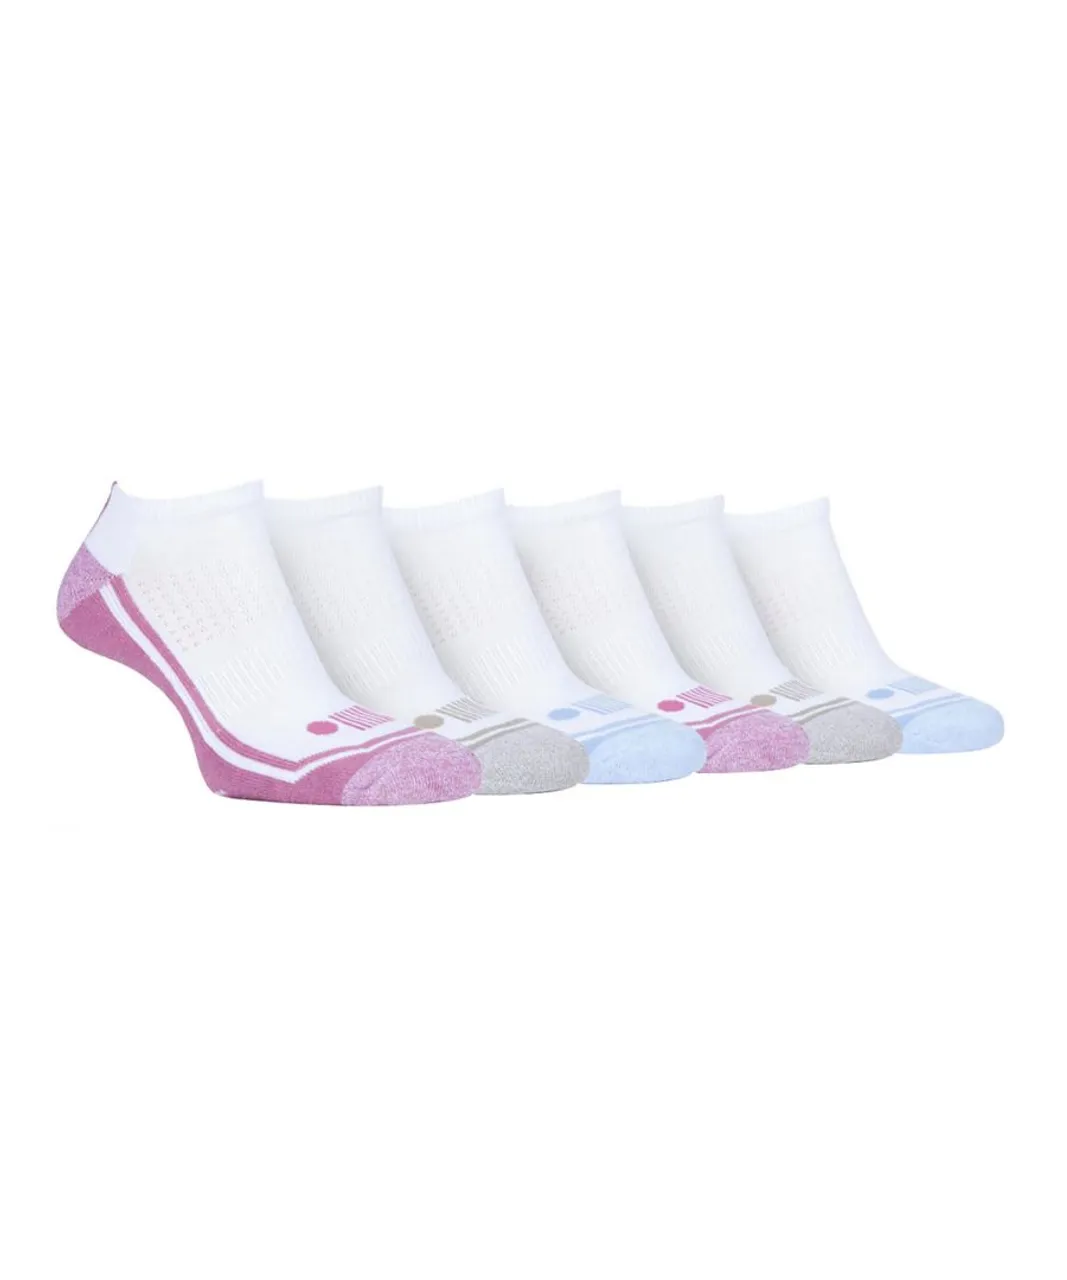 Jeep Womens - 6 Pairs Ladies Performance Poly Low Ankle Length Trainer Socks - Pink & White